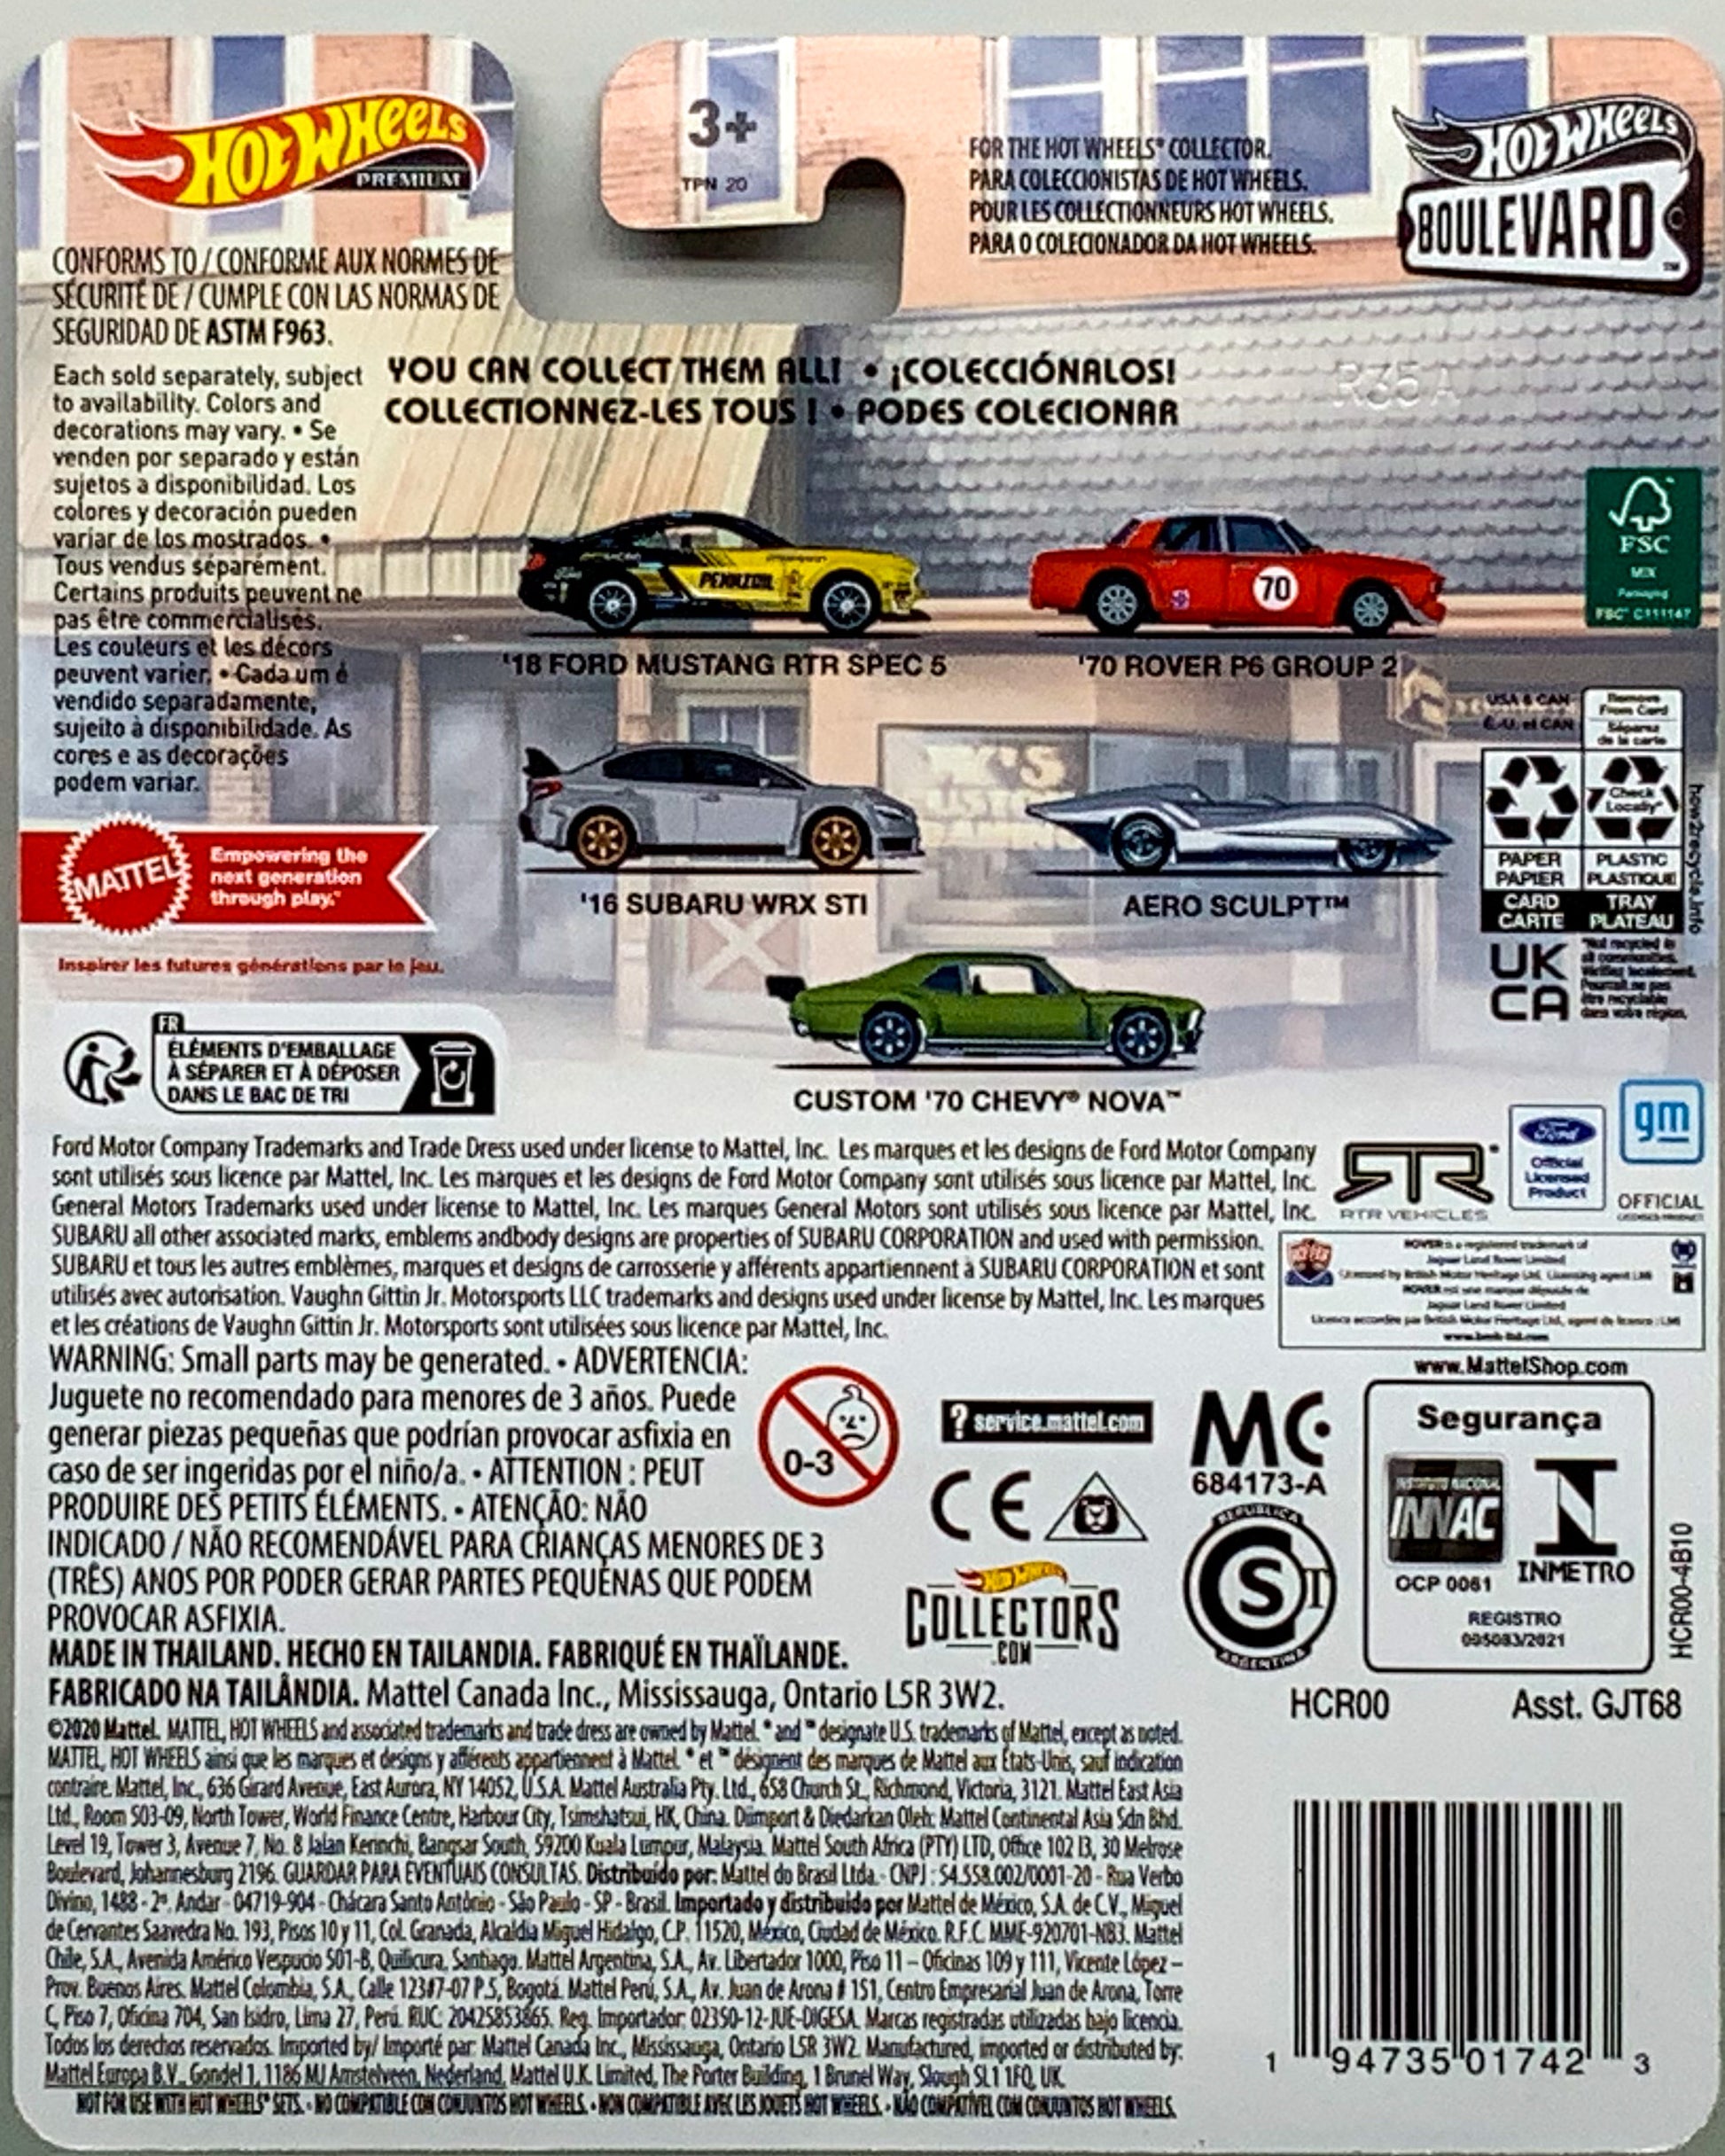 Buy at Tatoy Shop.com The back of Card shows the 5 Cars on Series Ford, Rover P6 Group 2, Sbaru WRX, Aero Sculpt, Custom Chevy Premium Collections